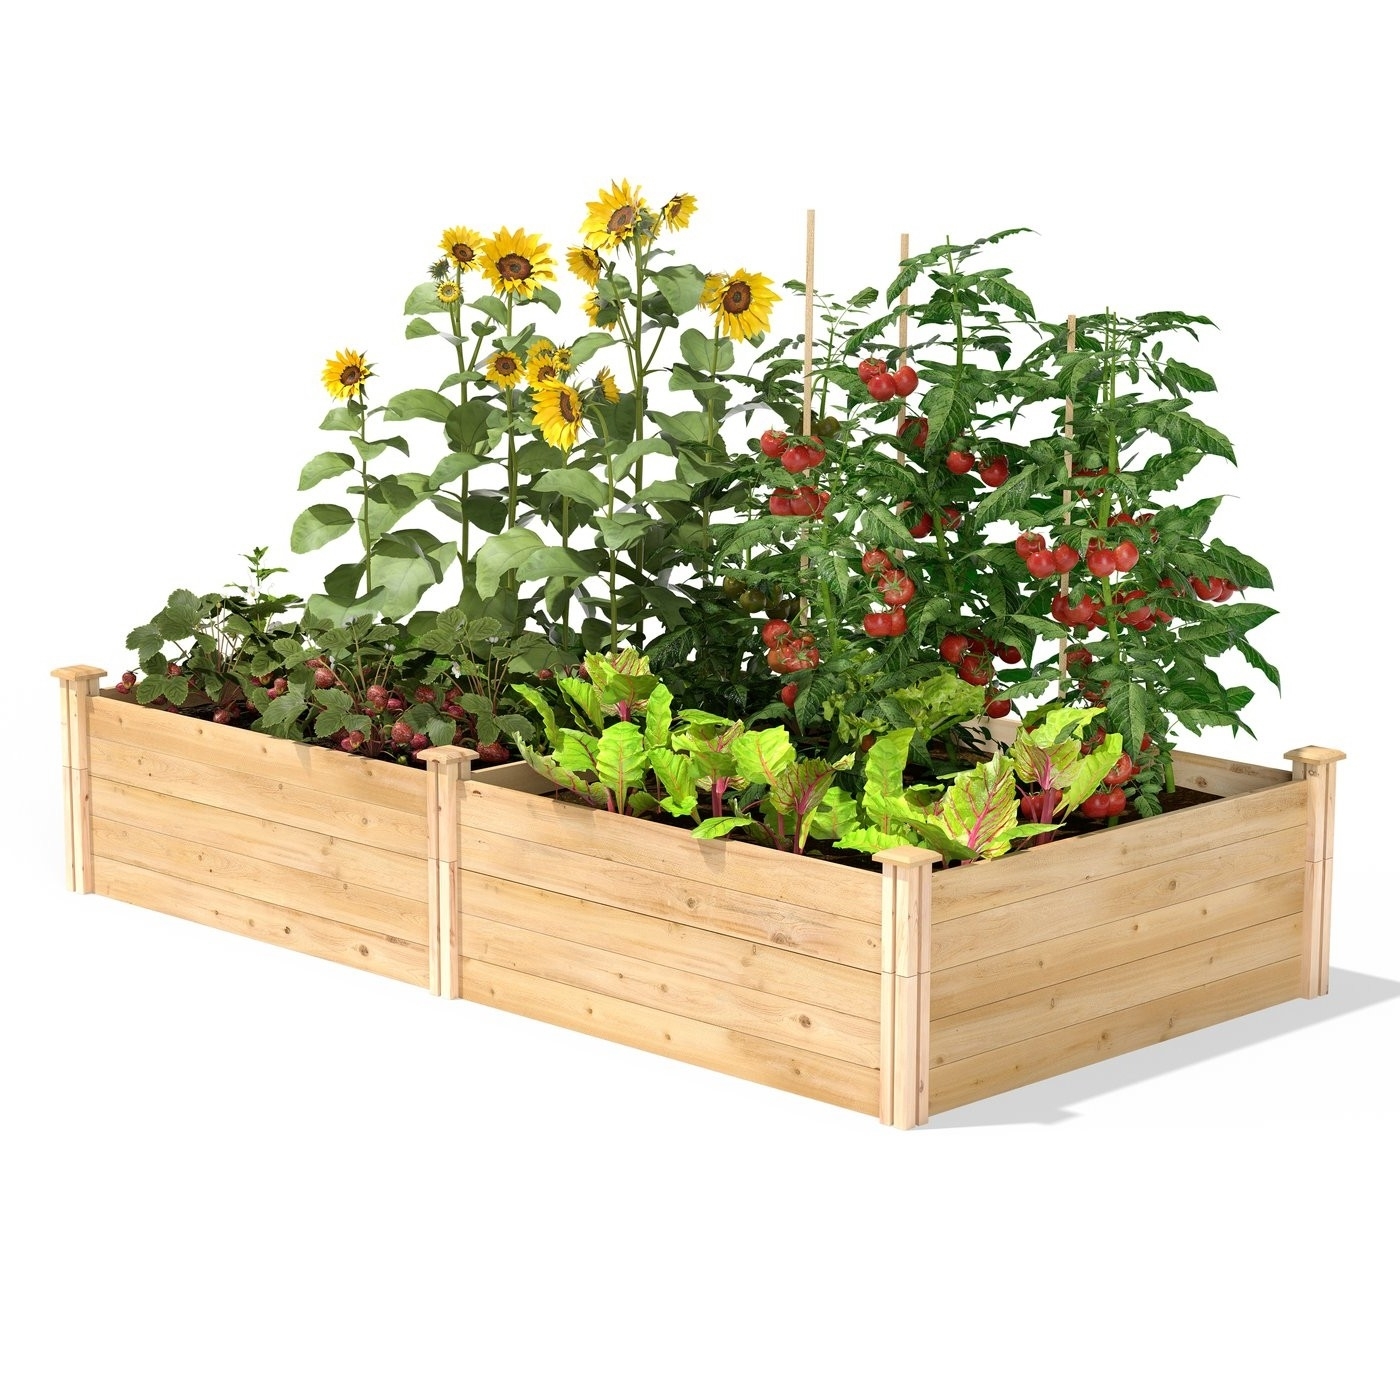 Primary image for 17-inch High Pine Wood Raised Garden Bed 4 ft x 8 ft - Made in USA